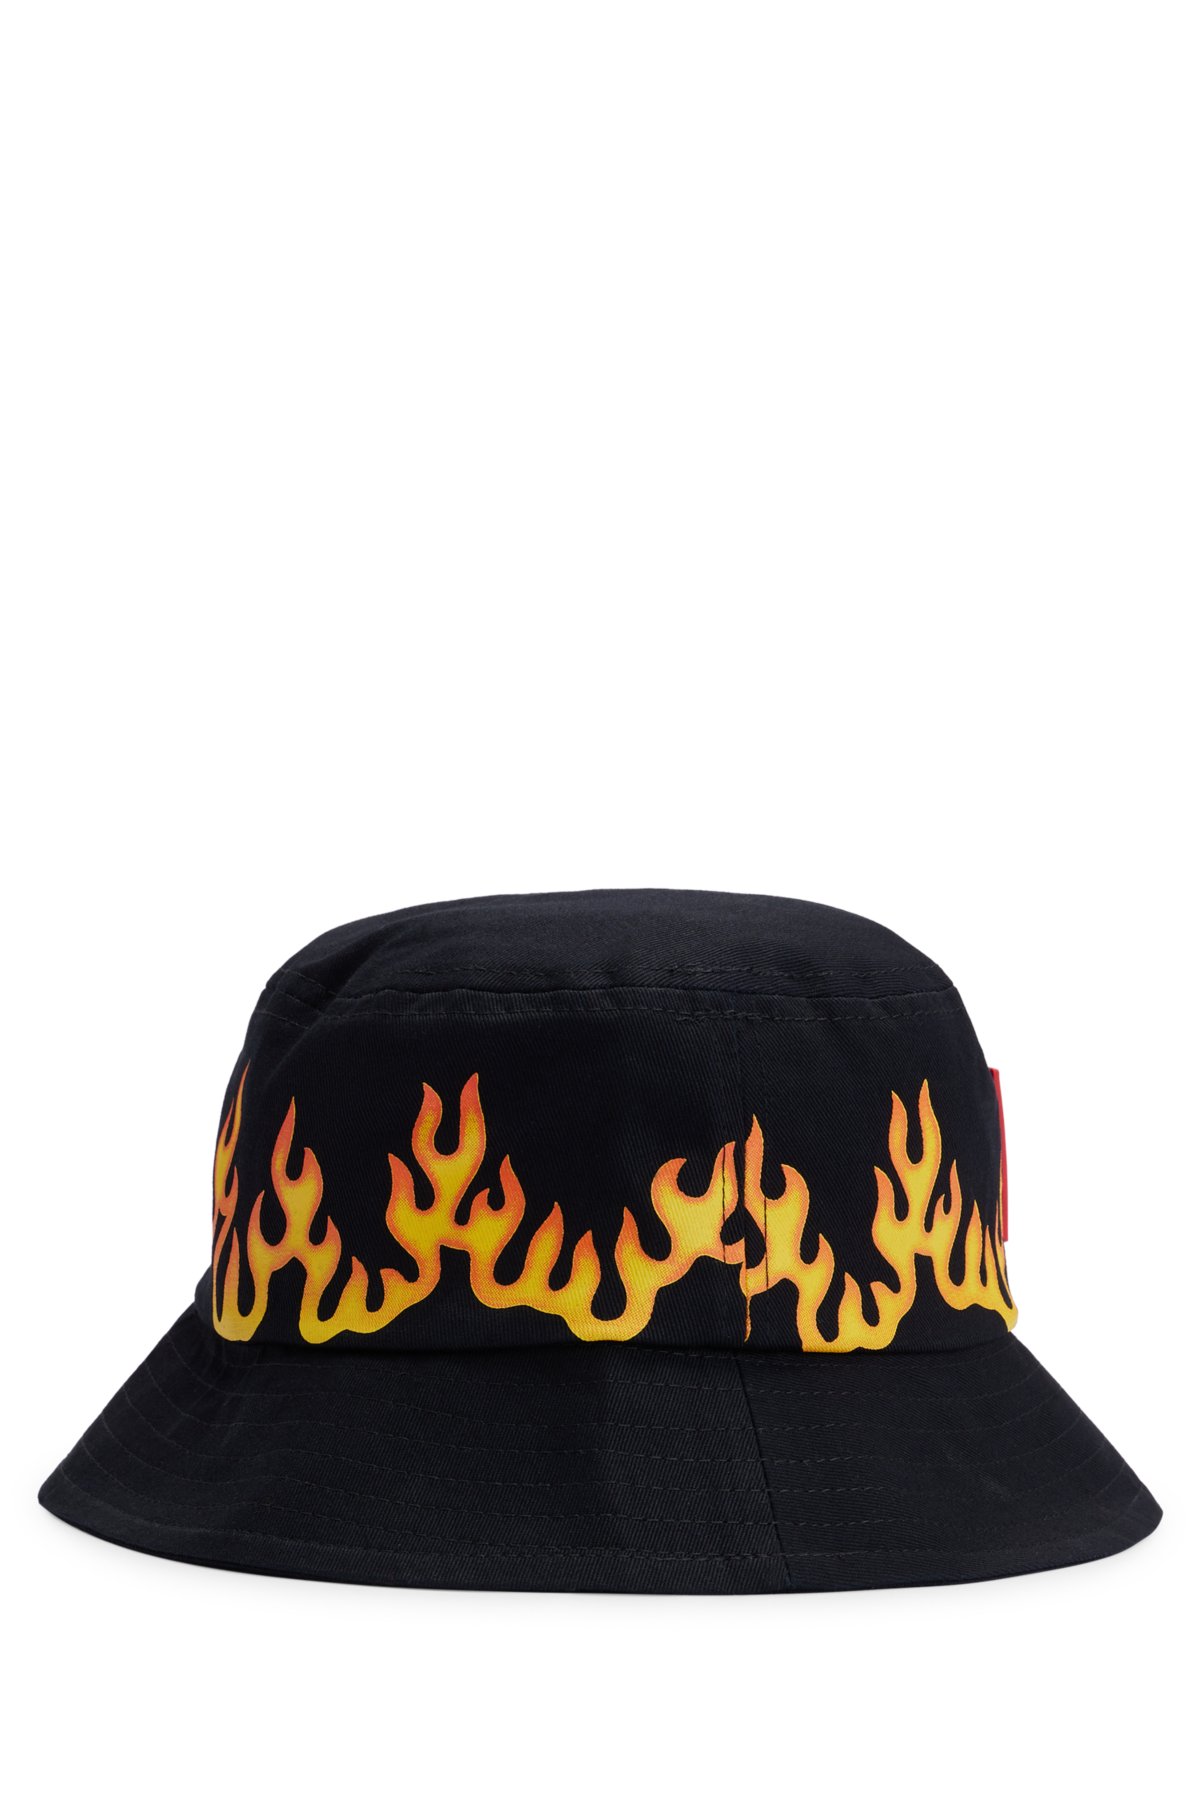 Kids' bucket hat in cotton canvas with flame artwork, Black